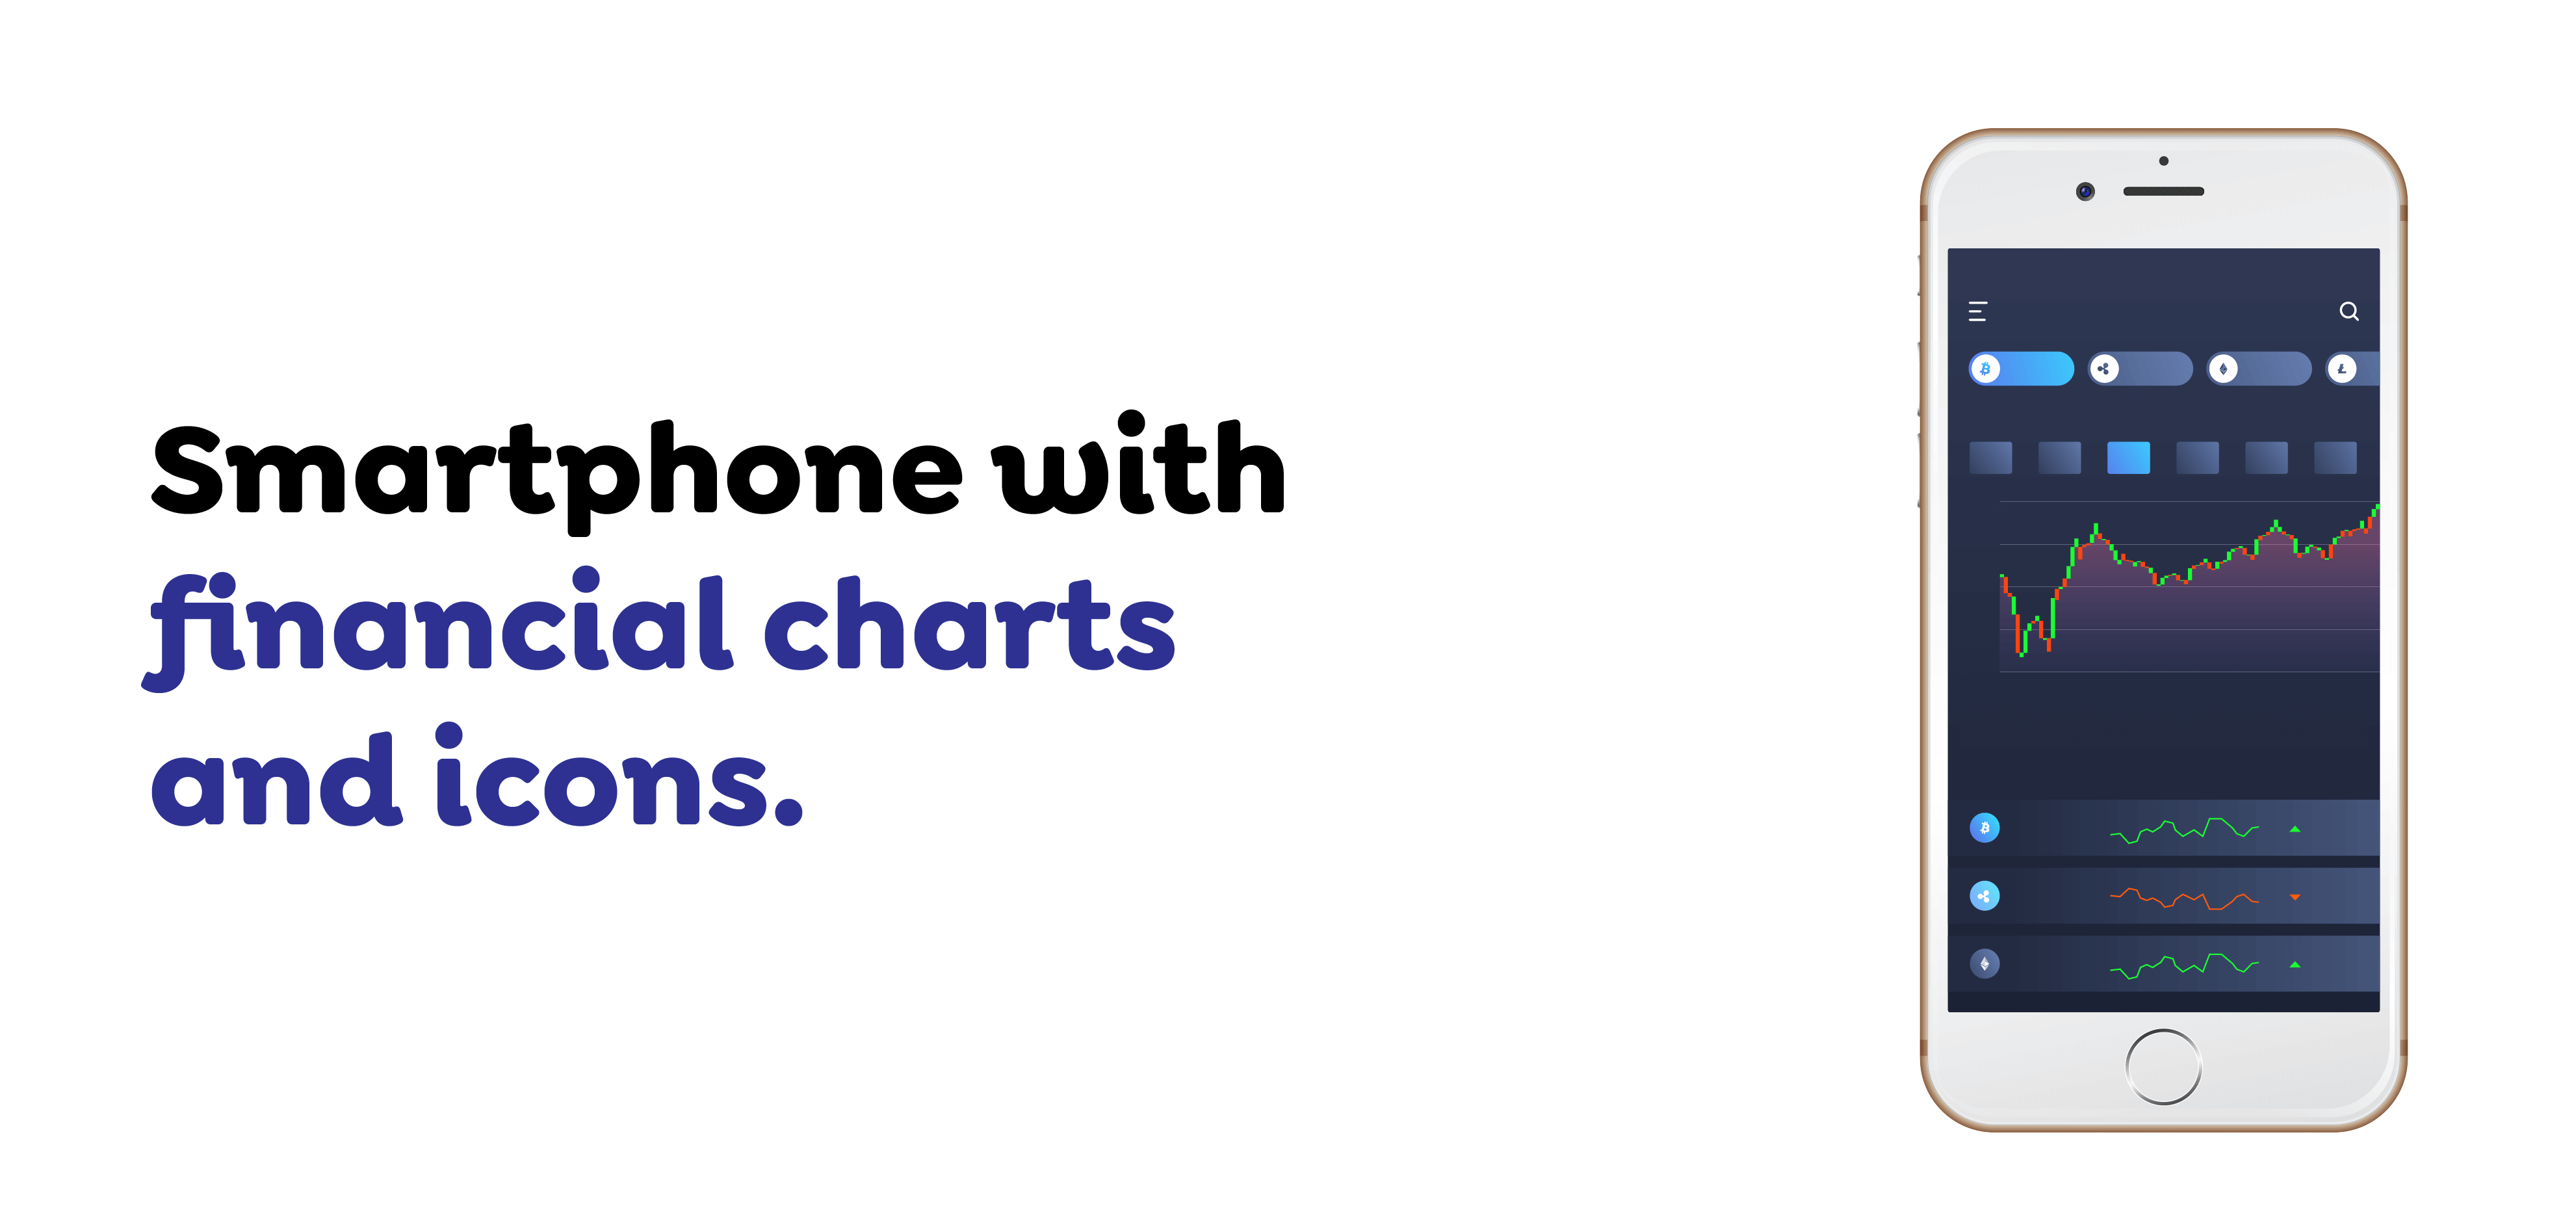 Smartphone with financial charts and icons. 